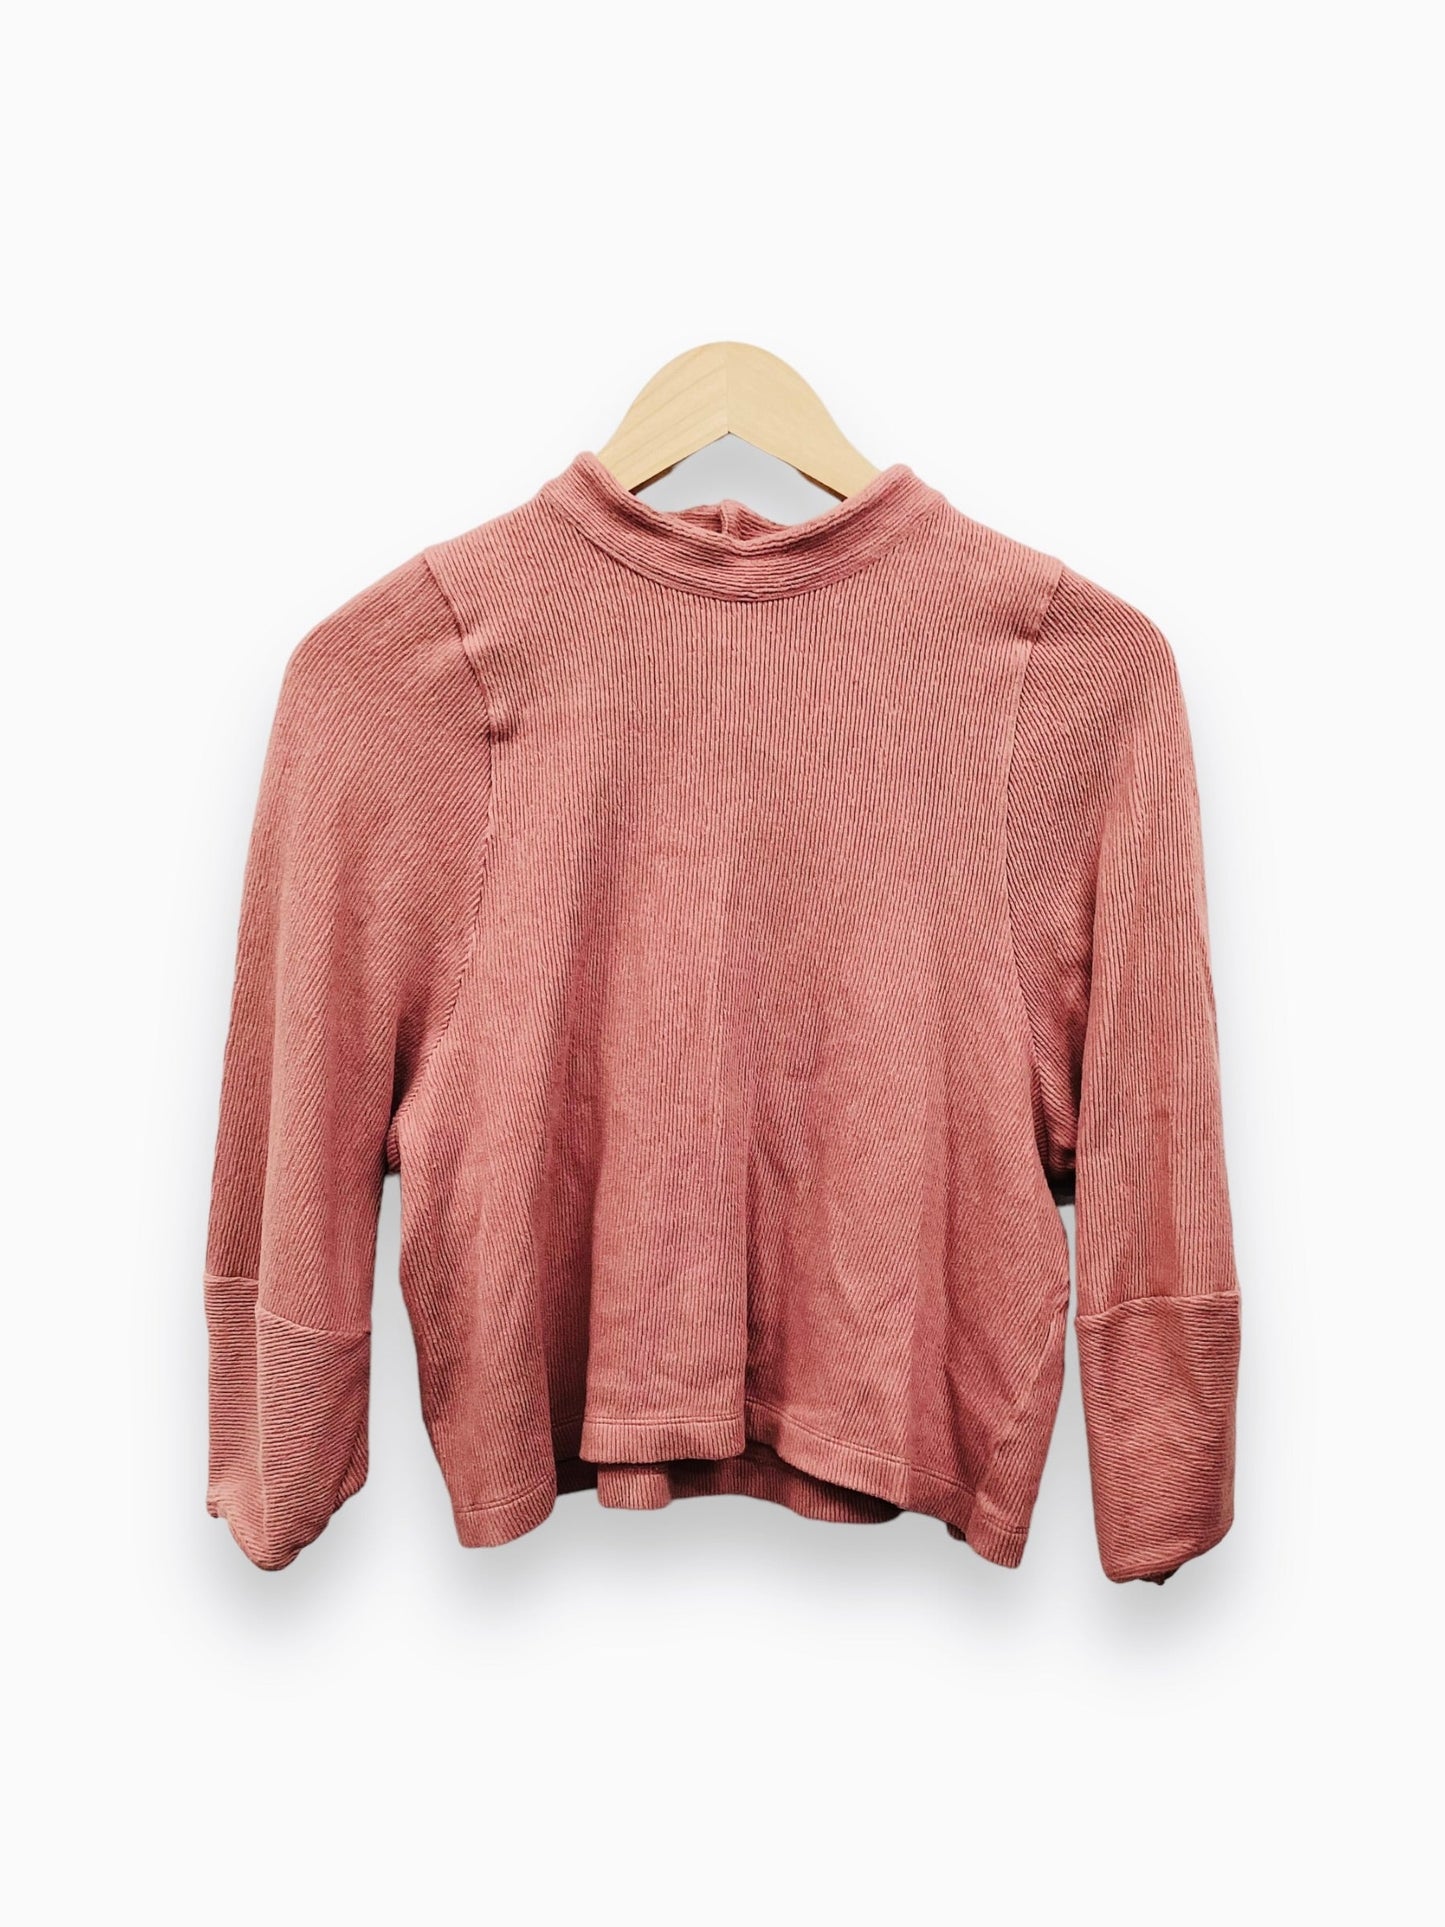 Pink Top Long Sleeve Madewell, Size M